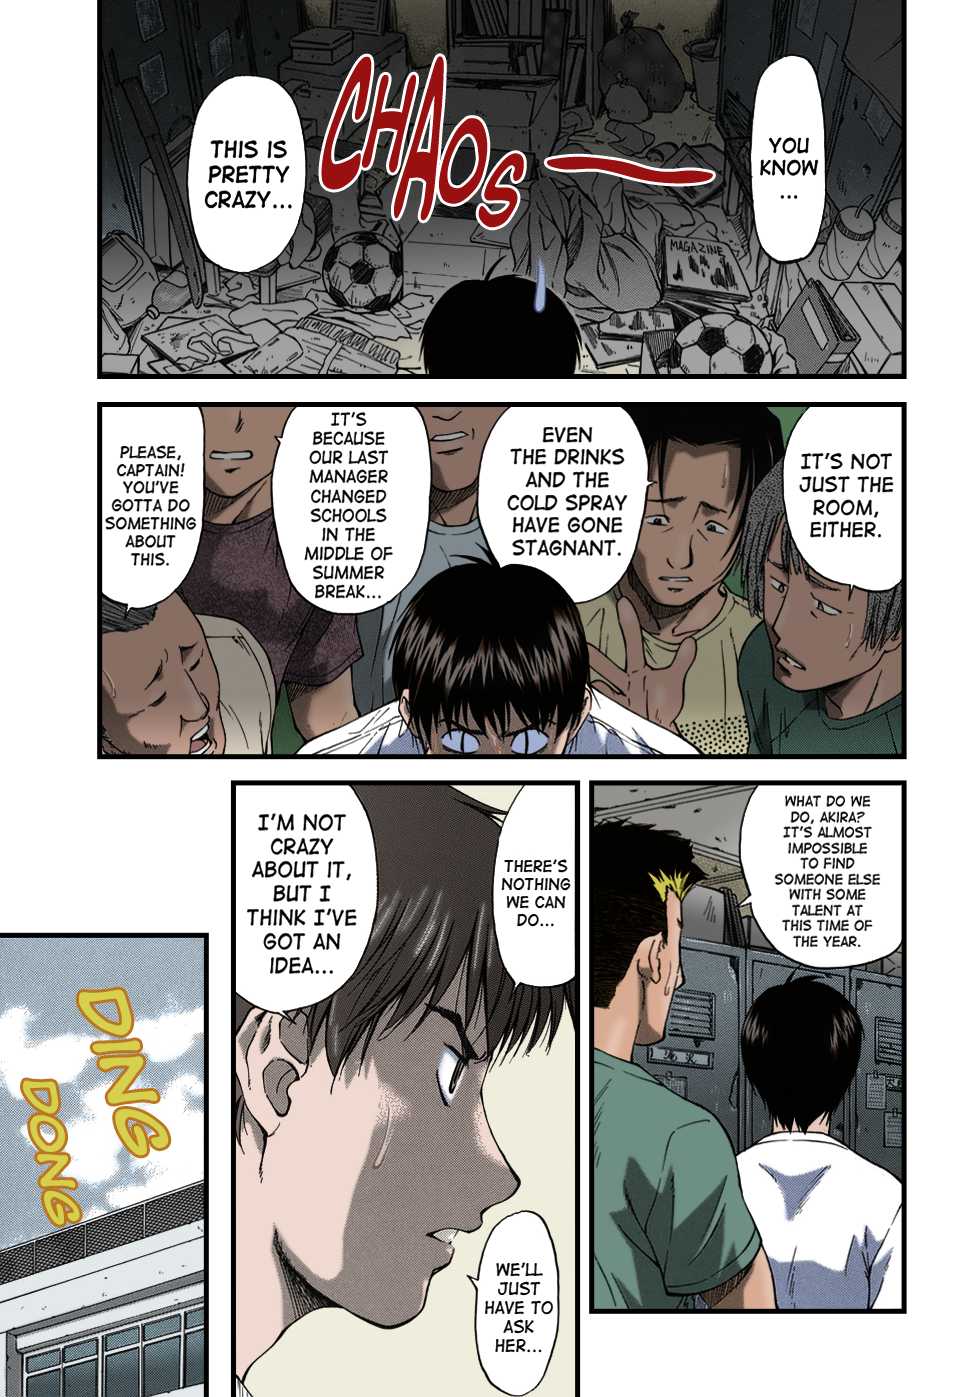 [Nagare Ippon] Offside Girl Ch. 1-4 [English] [Colorized] [Decensored] [WIP] - Page 7